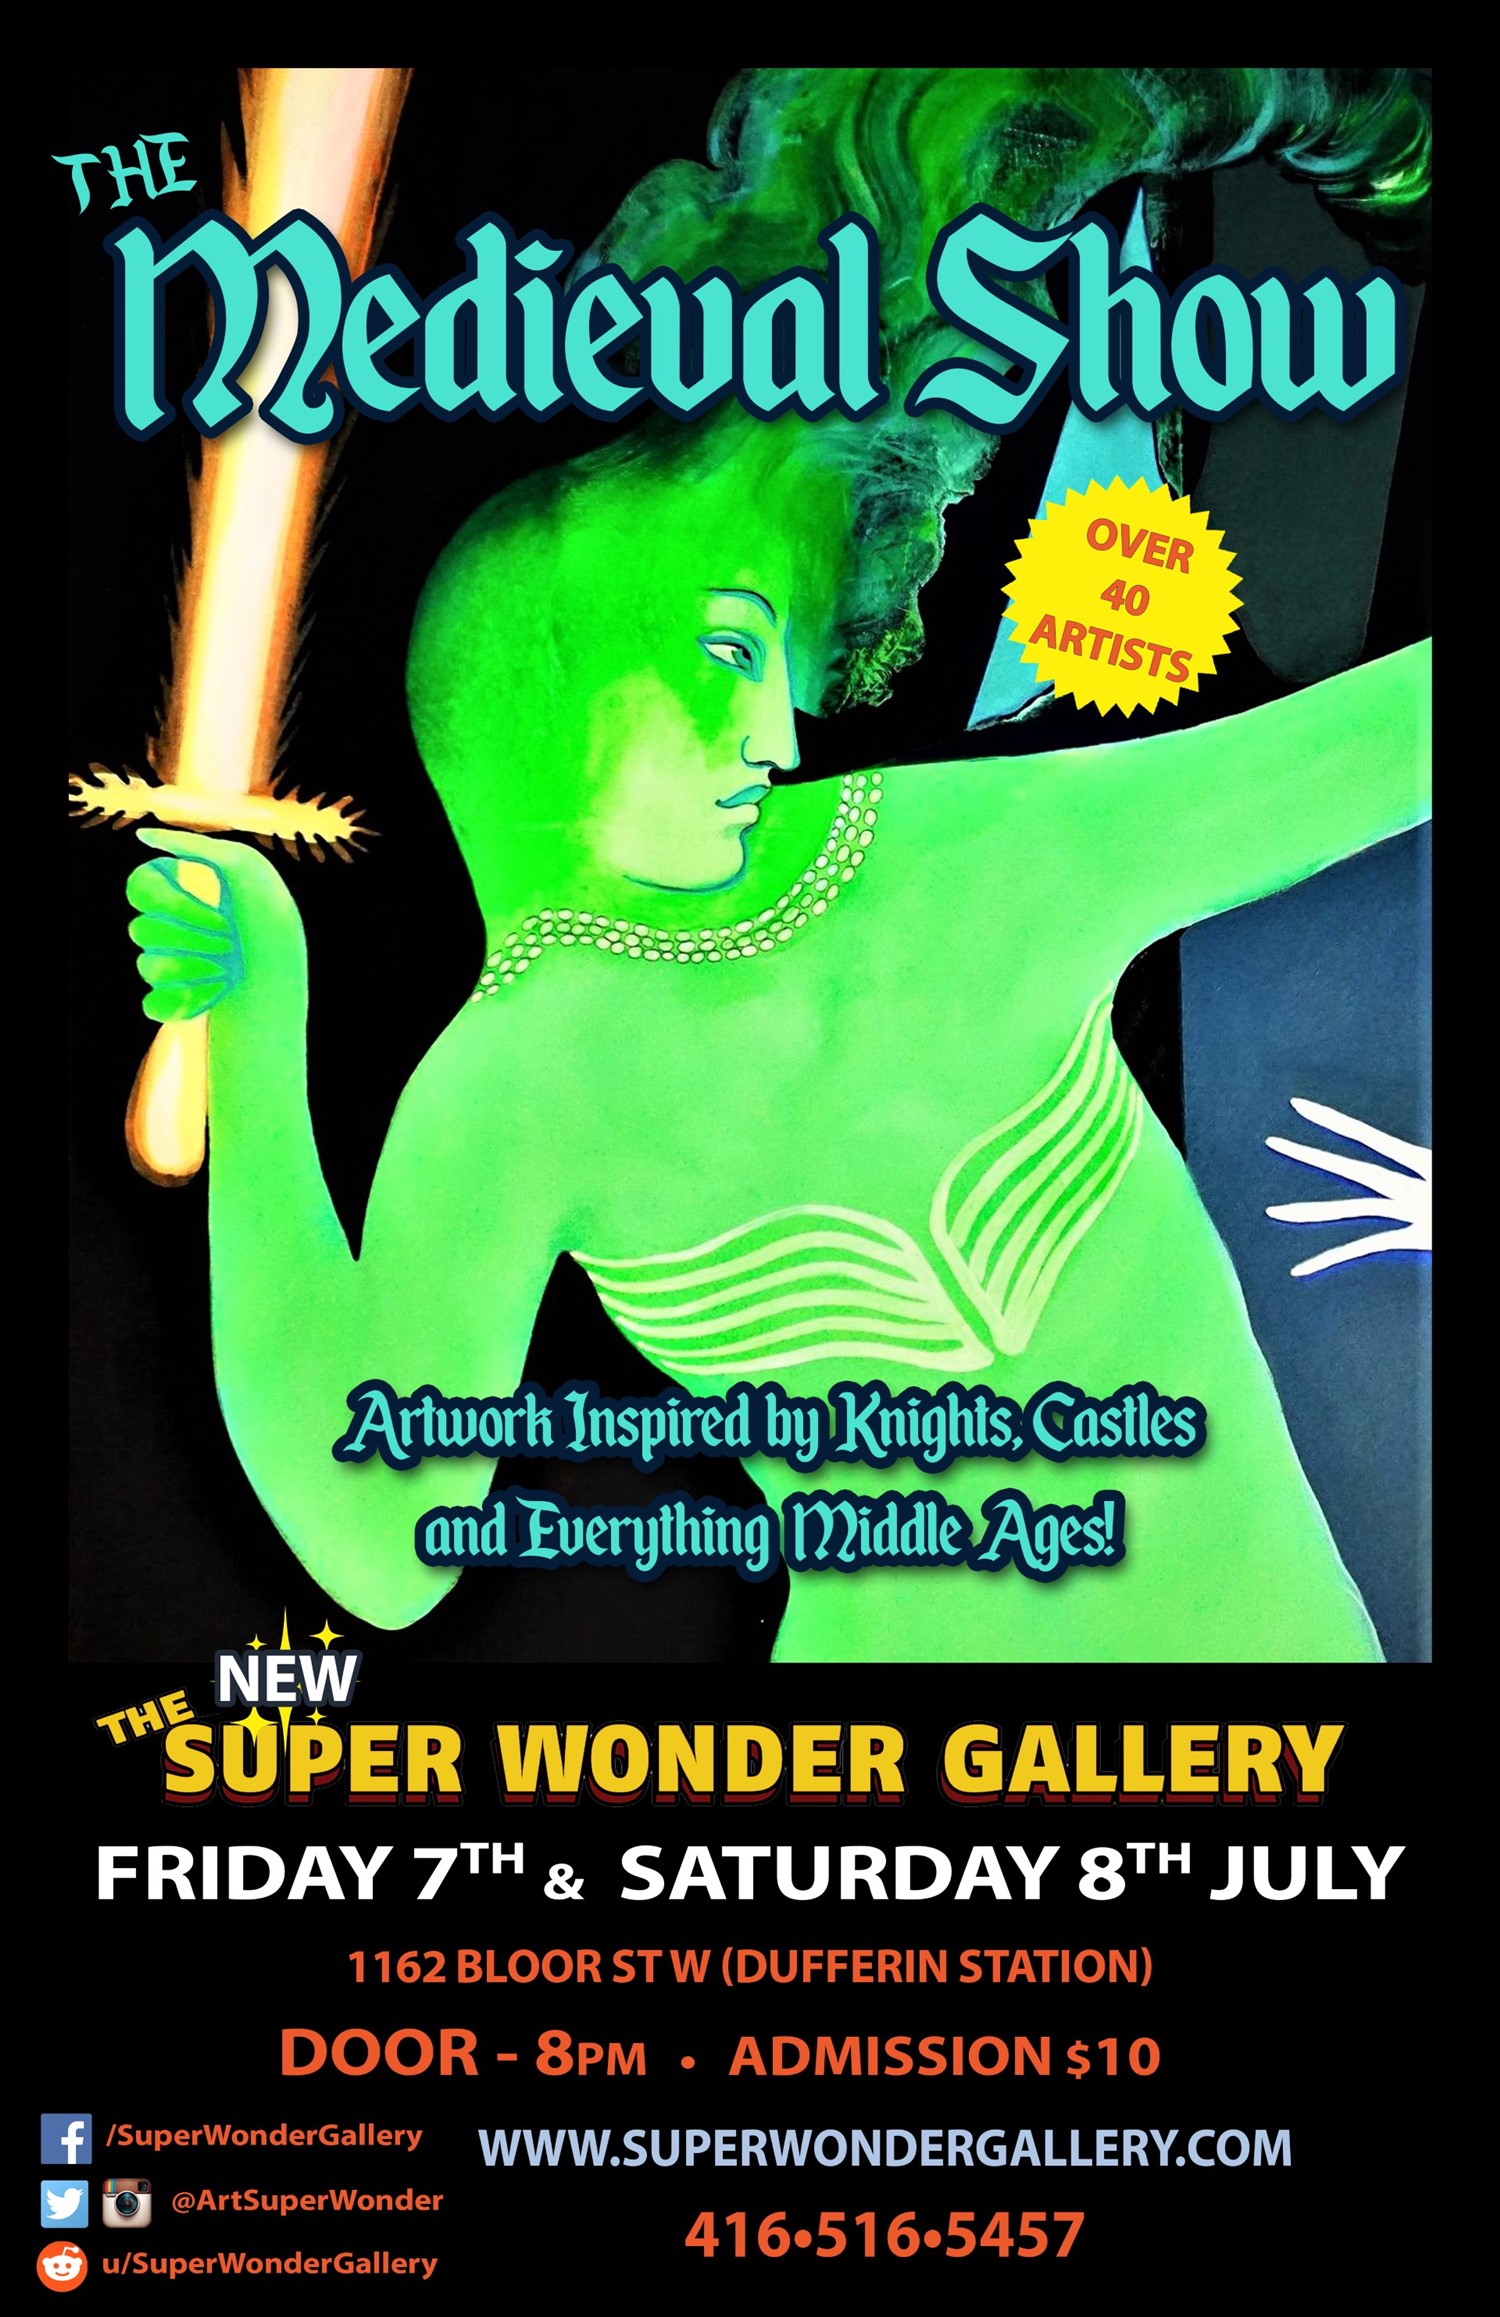 The Medieval Show Friday on Jul 07, 20:00@SUPER WONDER GALLERY - Buy tickets and Get information on Super Wonder Gallery 